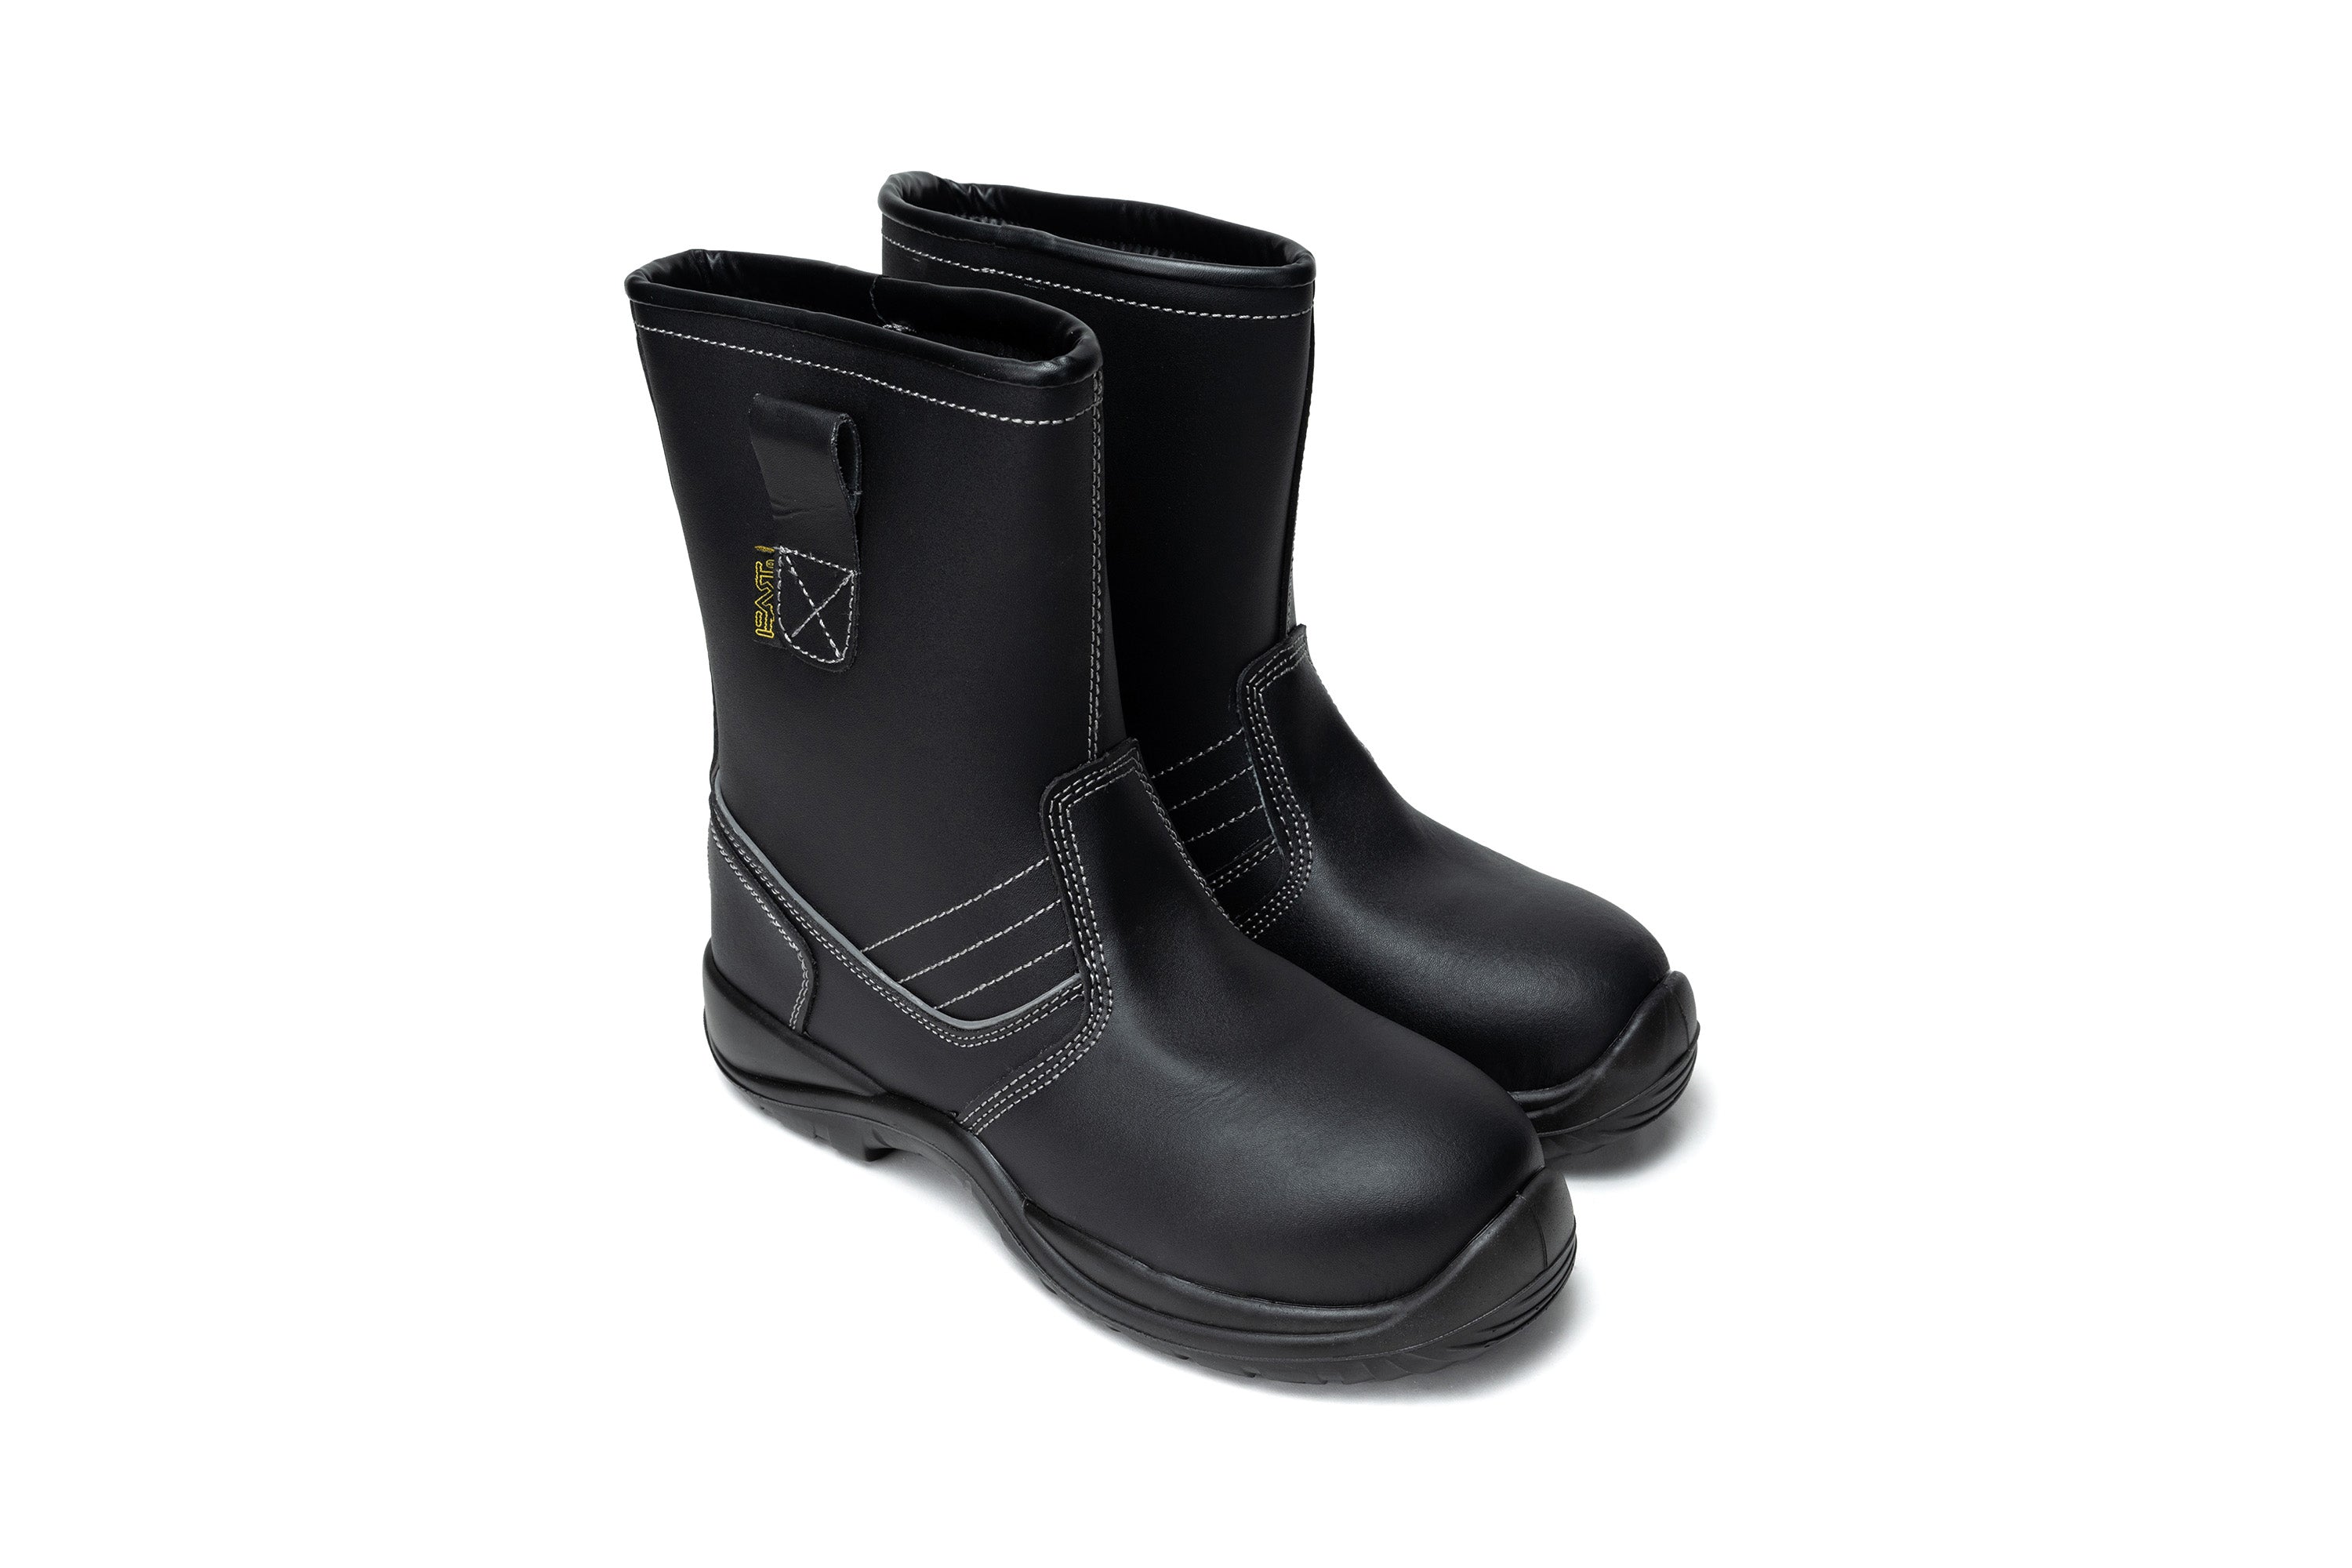 Safety Boots (Composite Safety Toes & Soles)